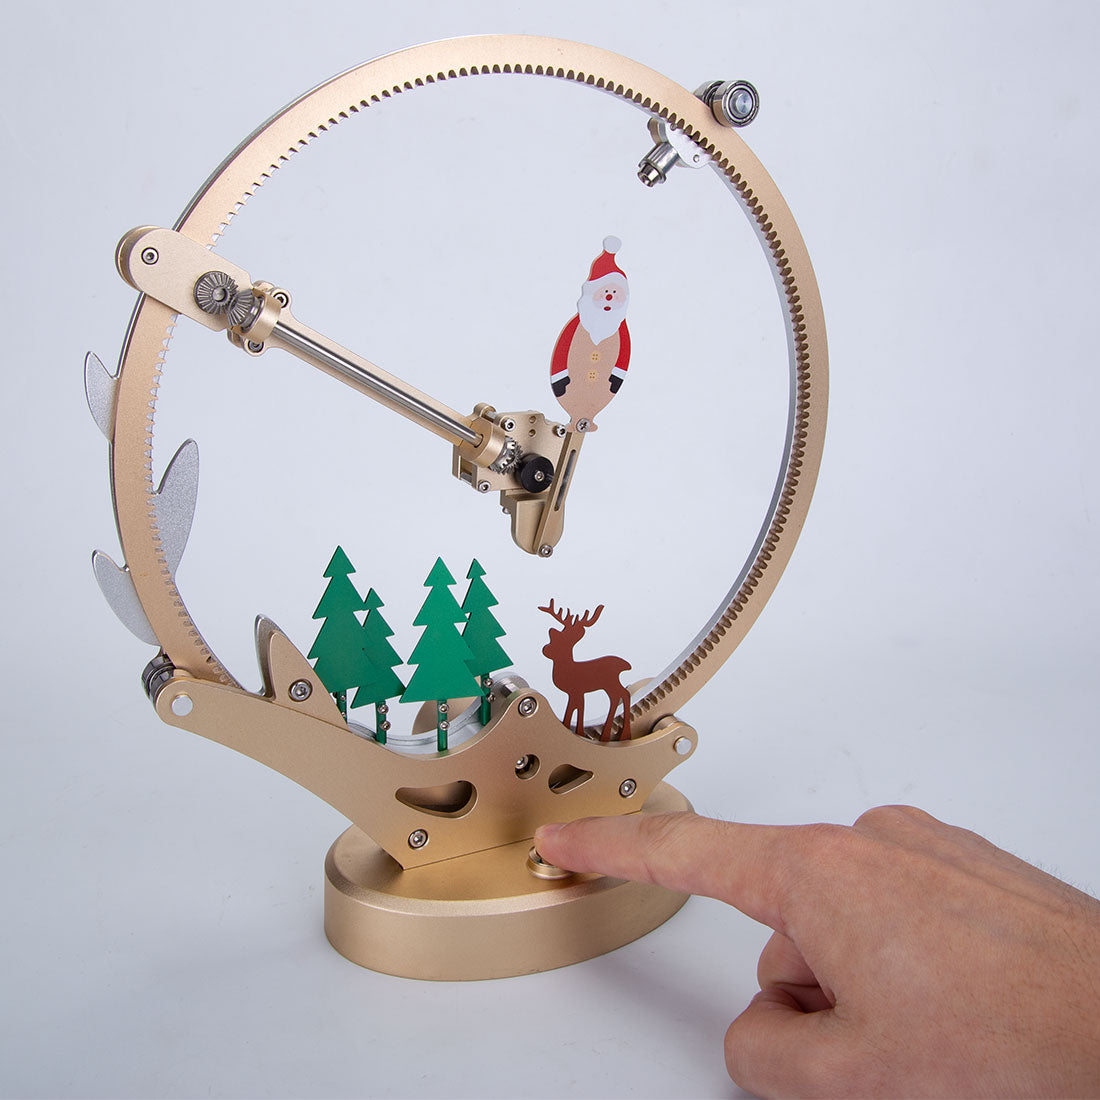 Build a Santa Claus Forest Kits That Works 3D Metal Puzzle Christmas Gifts Teching